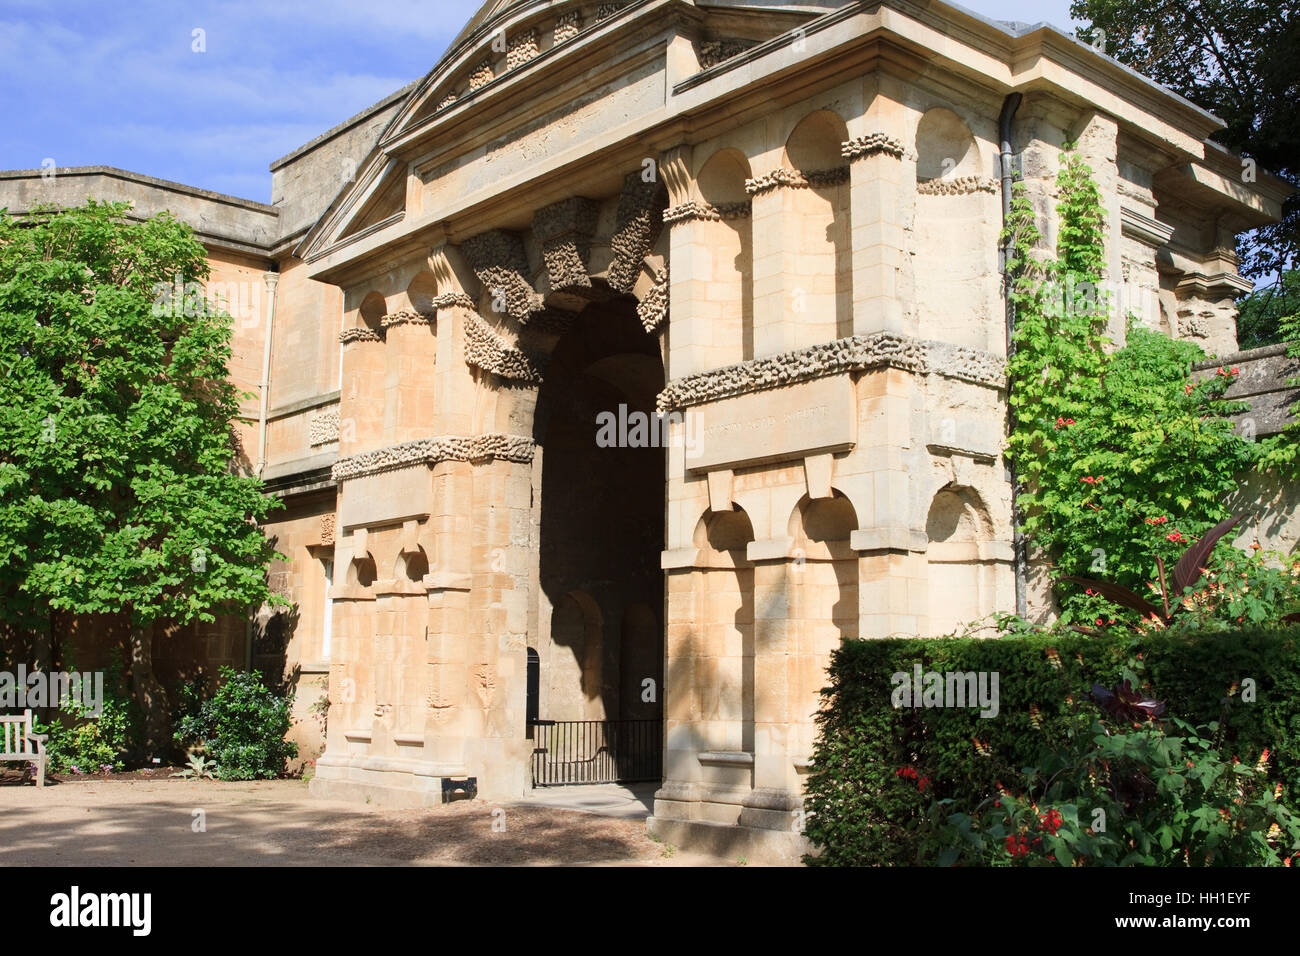 The Danby Gateway (or Arch) in the University of Oxford Botanic Garden, Oxford, England. Stock Photo